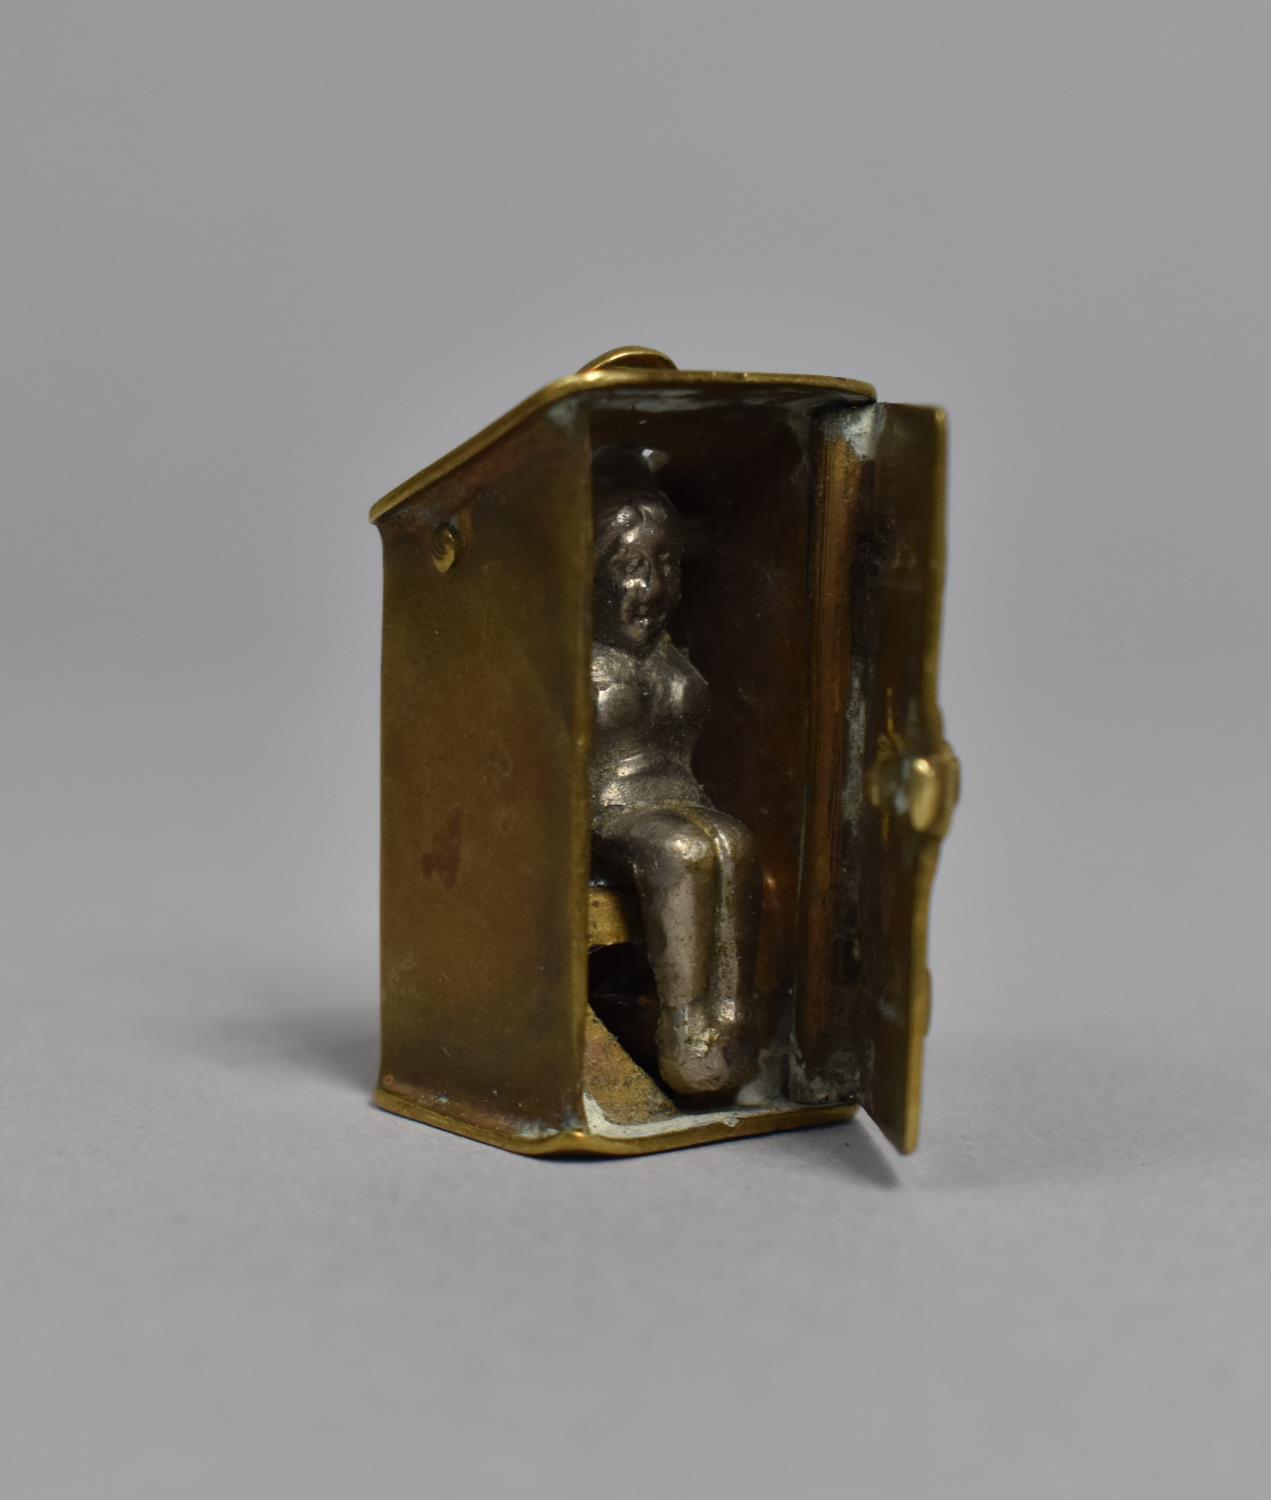 A Late 19th/Early 20th Century Novelty Cheroot Cutter Fob in the form of Nude Lady in Outhouse,